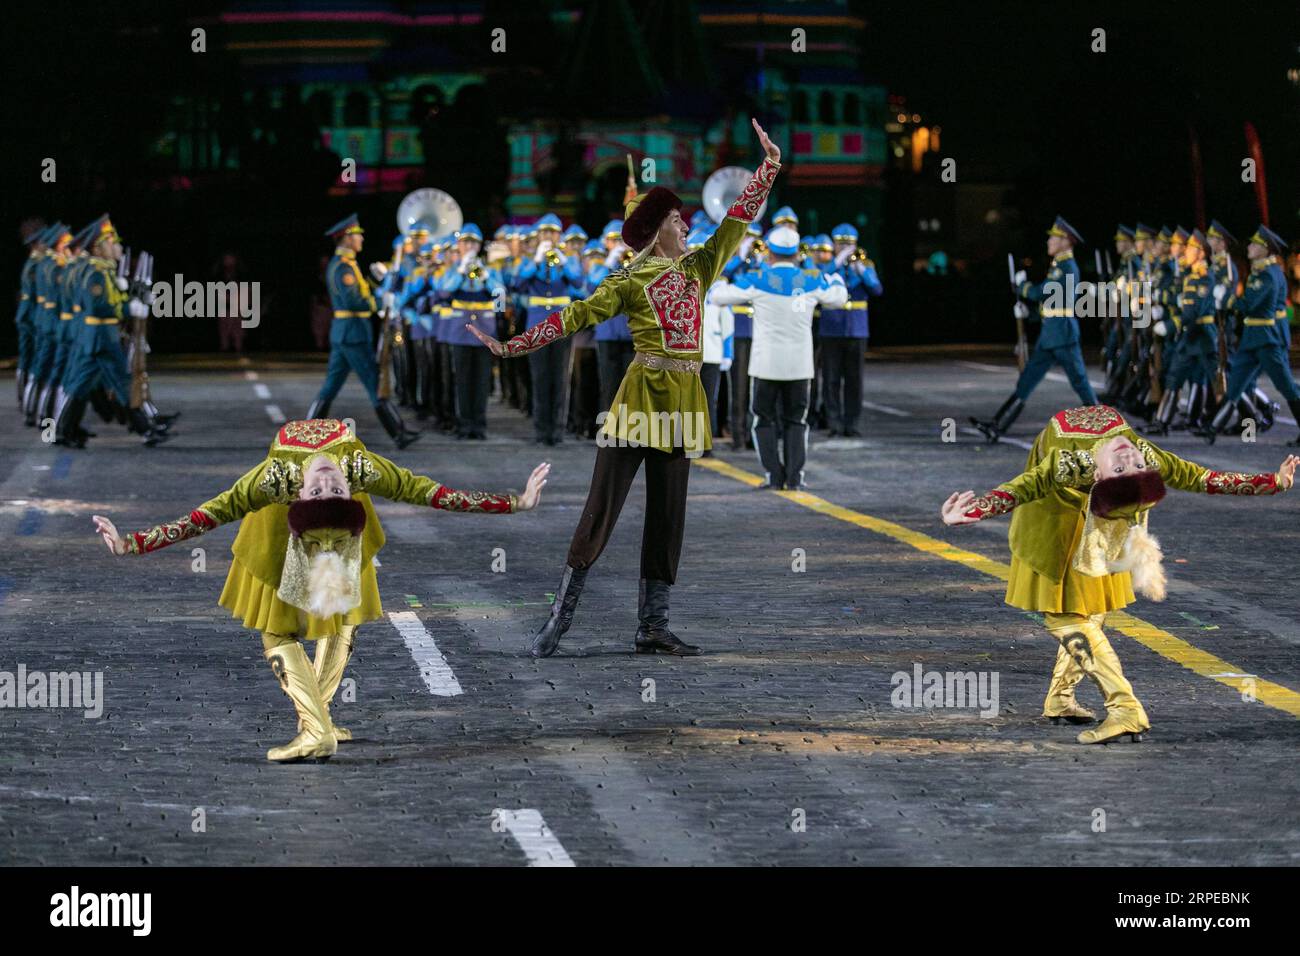 Russland, Militärmusik-Festival in Moskau (190824) -- MOSCOW, Aug. 24, 2019 -- Dancers perform during the opening day of Spasskaya Tower International Military Music Festival in Moscow, Russia, on Aug. 23, 2019. The annual military music festival opened on Friday on the Red Square in Moscow, and will run until September 1. ) RUSSIA-MOSCOW-MILITARY MUSIC FESTIVAL-OPENING BaixXueqi PUBLICATIONxNOTxINxCHN Stock Photo